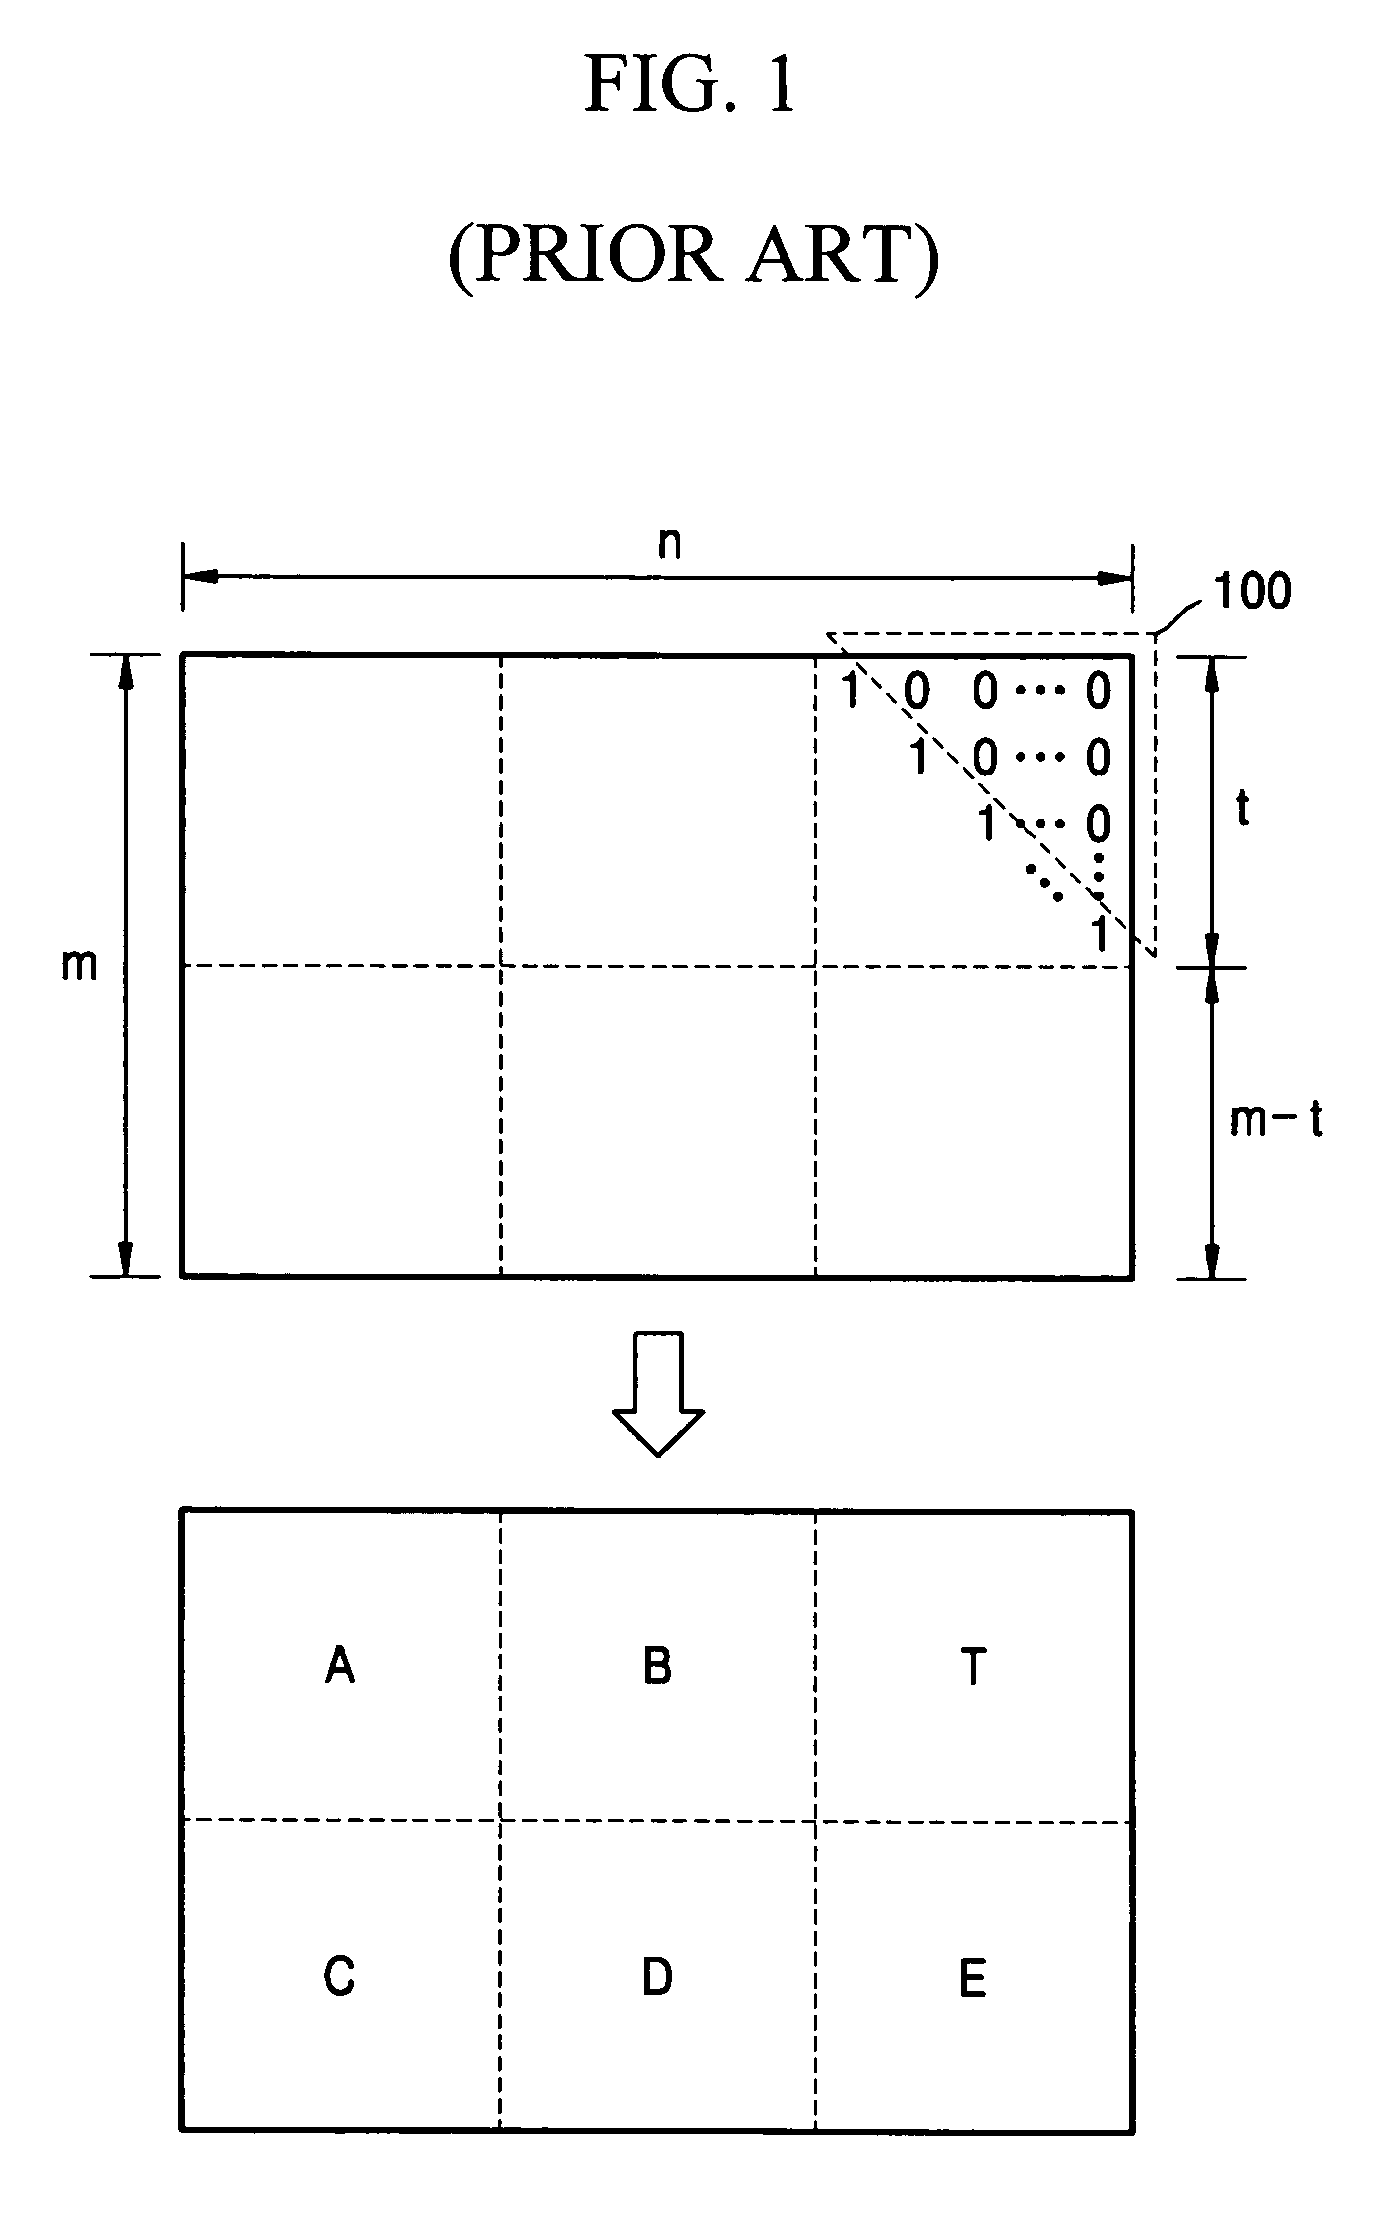 Method and apparatus for generating block-based low-density parity check matrix and recording medium having recorded thereon code for implementing the method